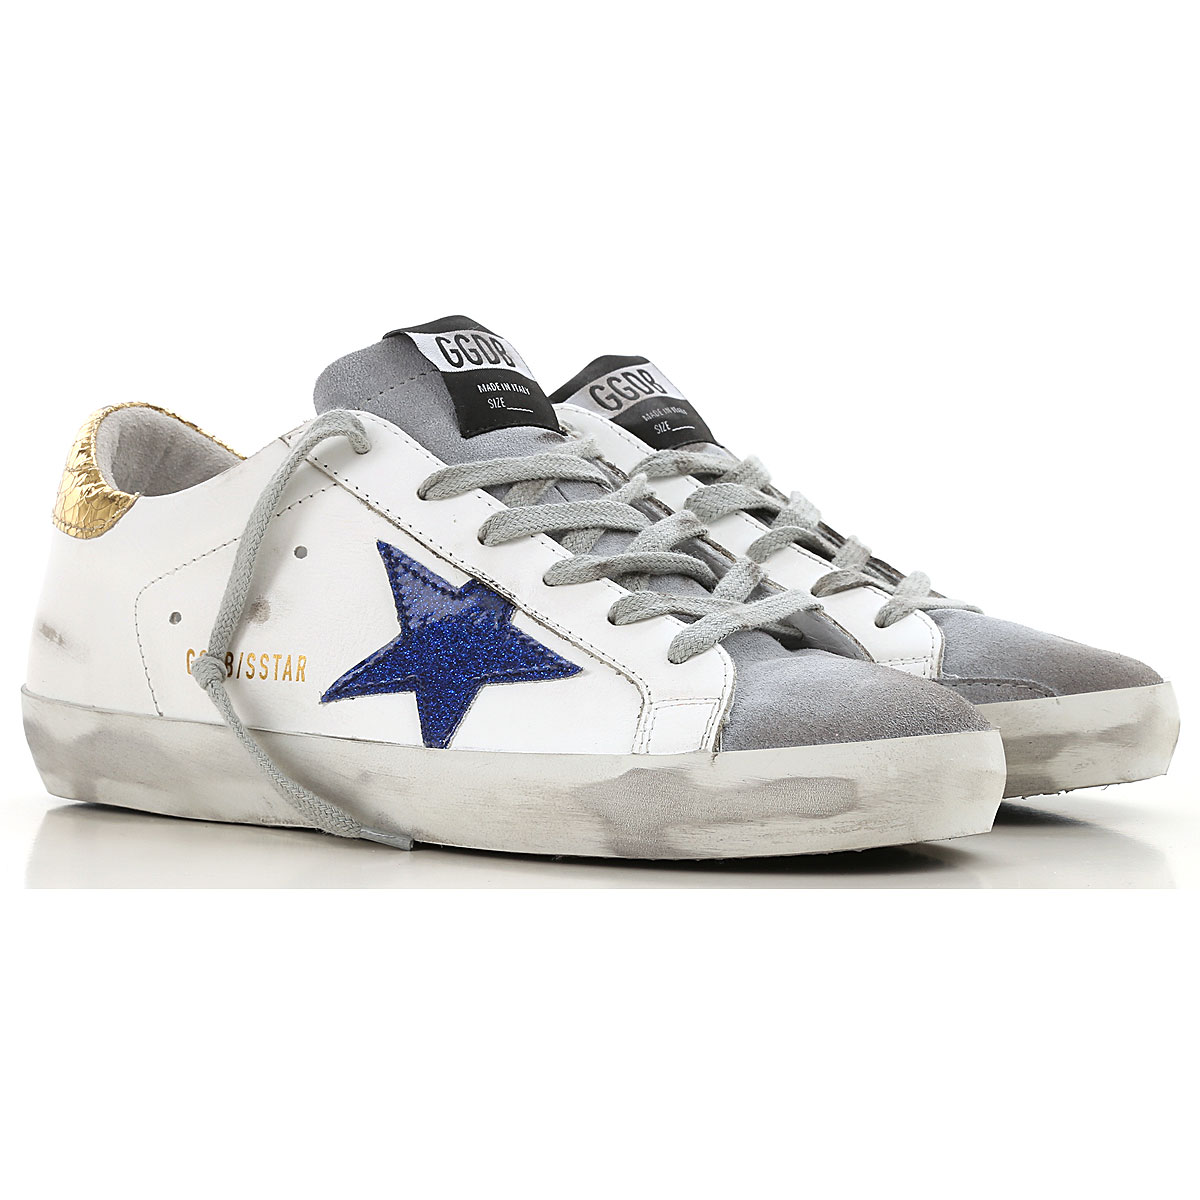 Womens Shoes Golden Goose, Style code: g34ws590-m64-